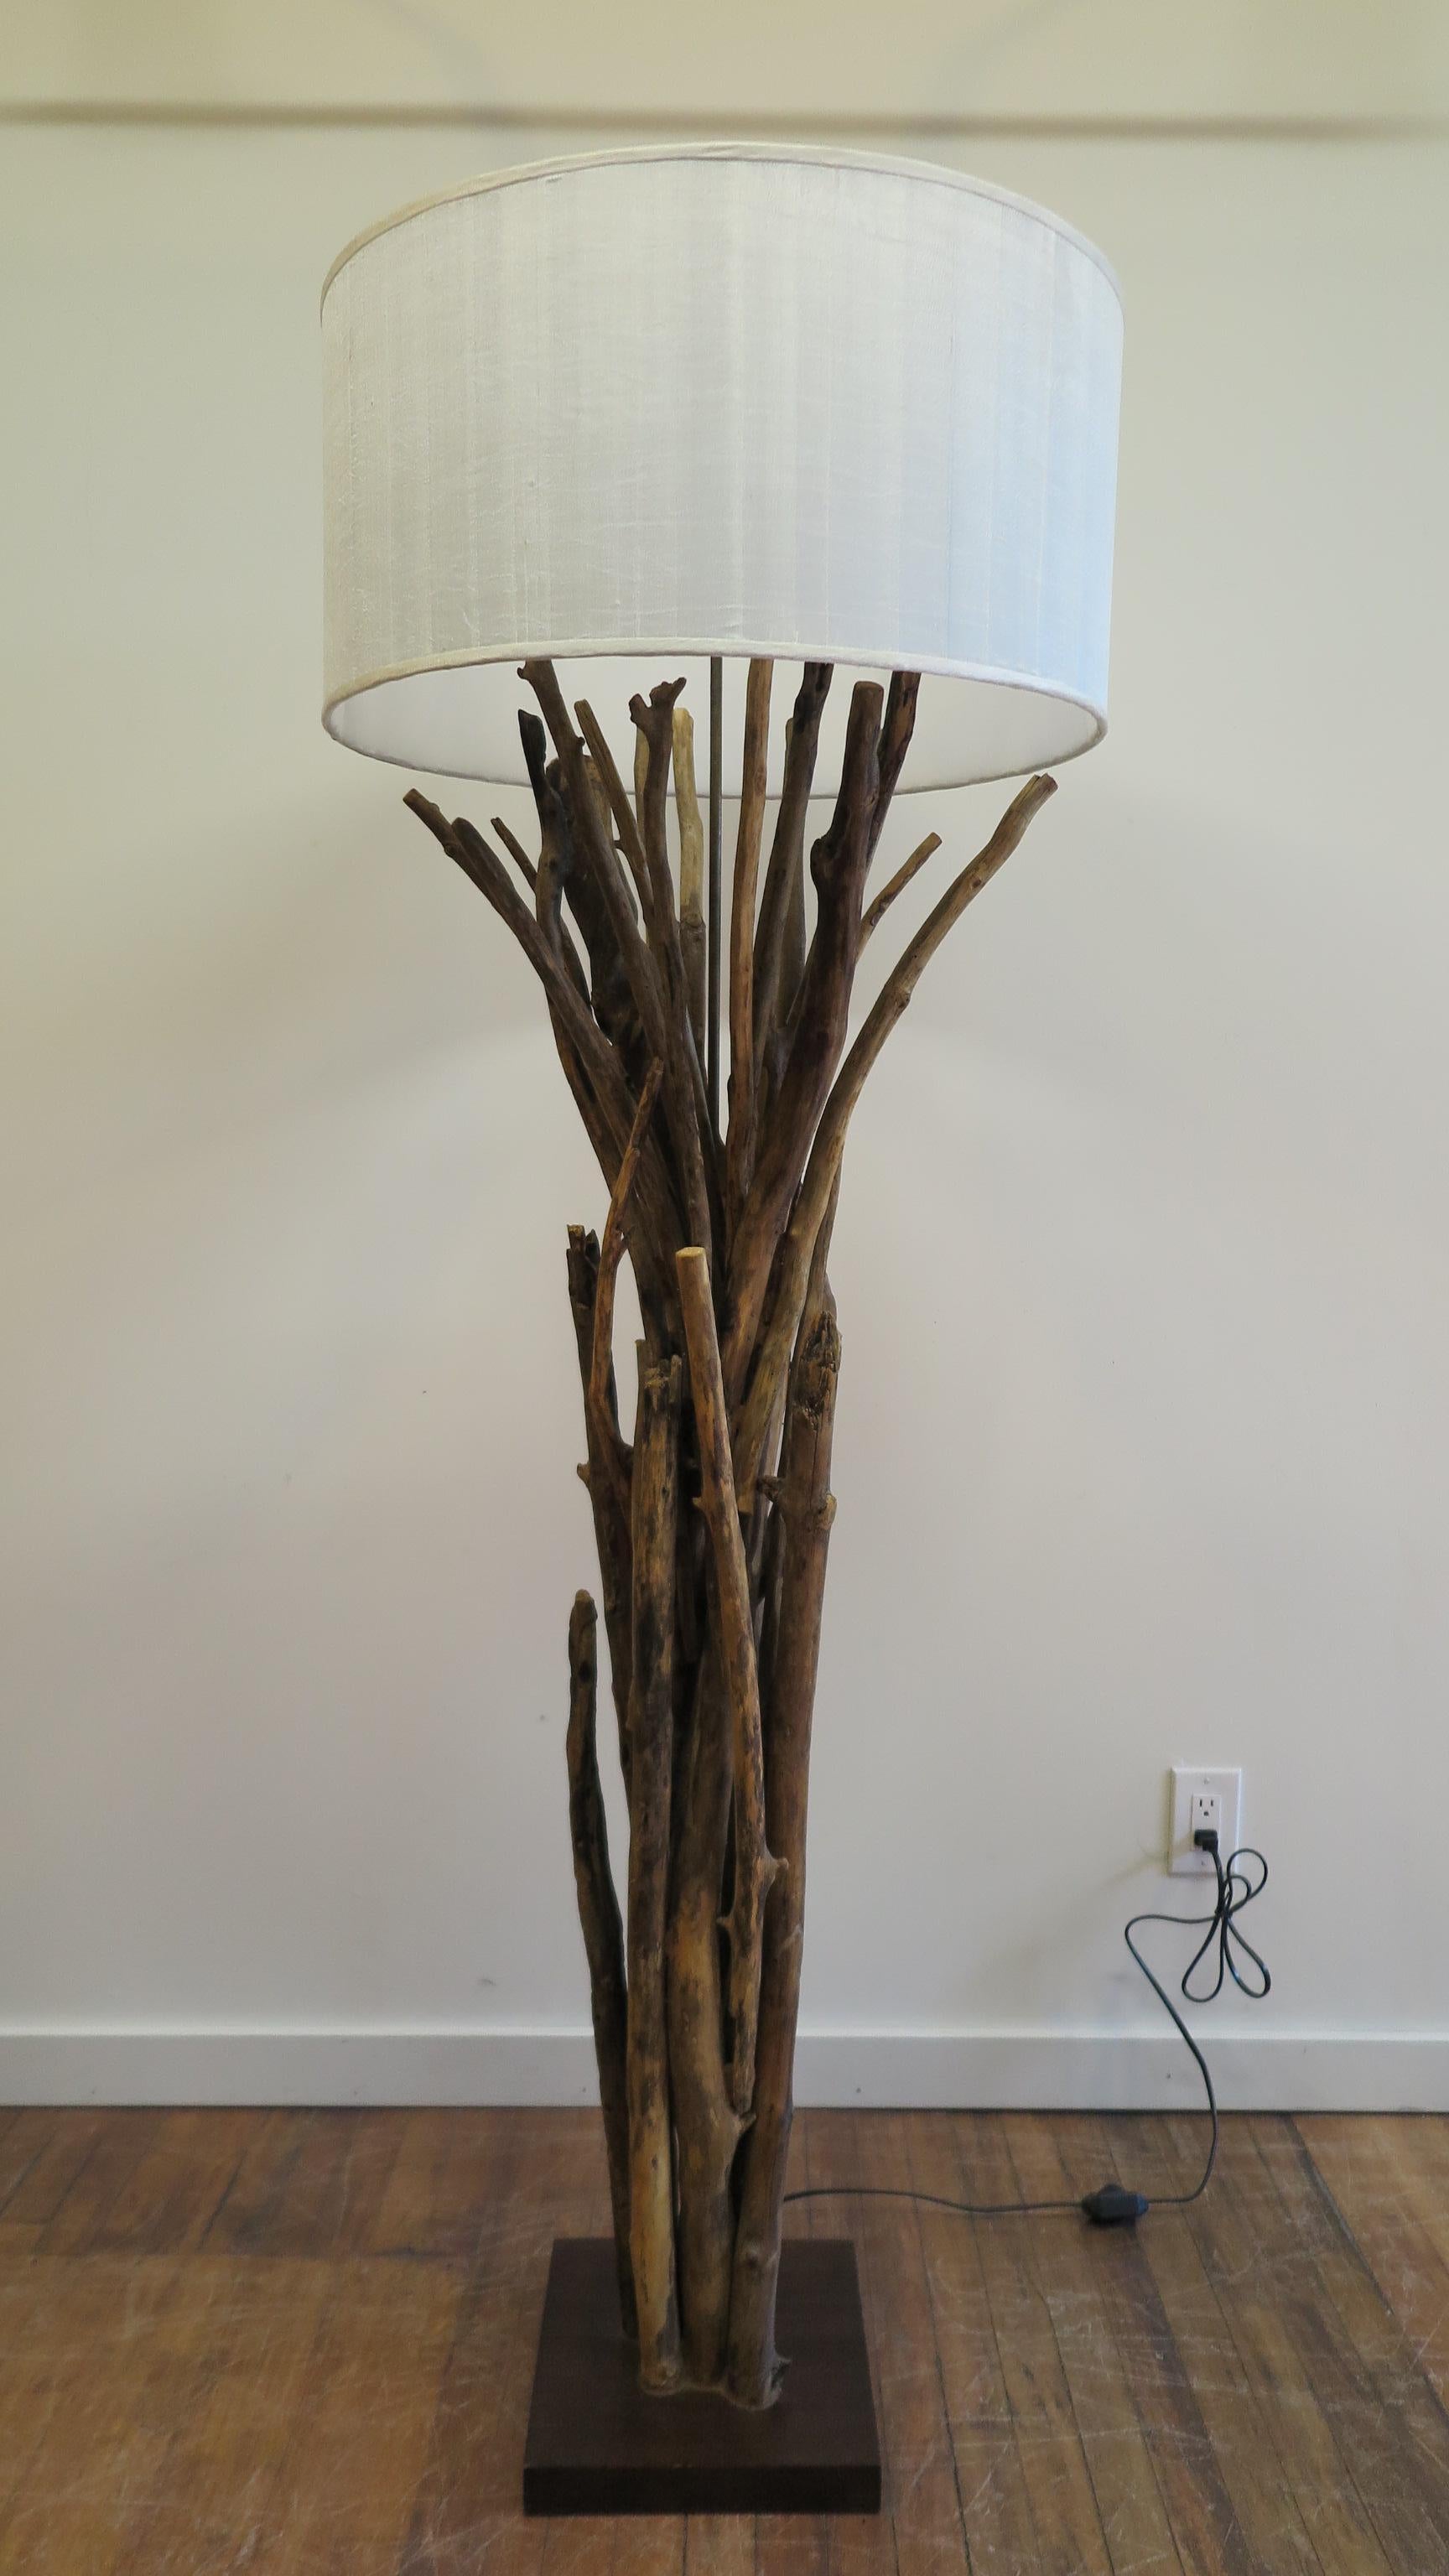 Twig floor lamp, driftwood Lamp rustic Country style with linen shade. A Tree Branch lamp Complete with dimmer on and off switch on cord, and also a pull switch on the lamp socket. This allows you to set the dimmer to your liking and maintain the